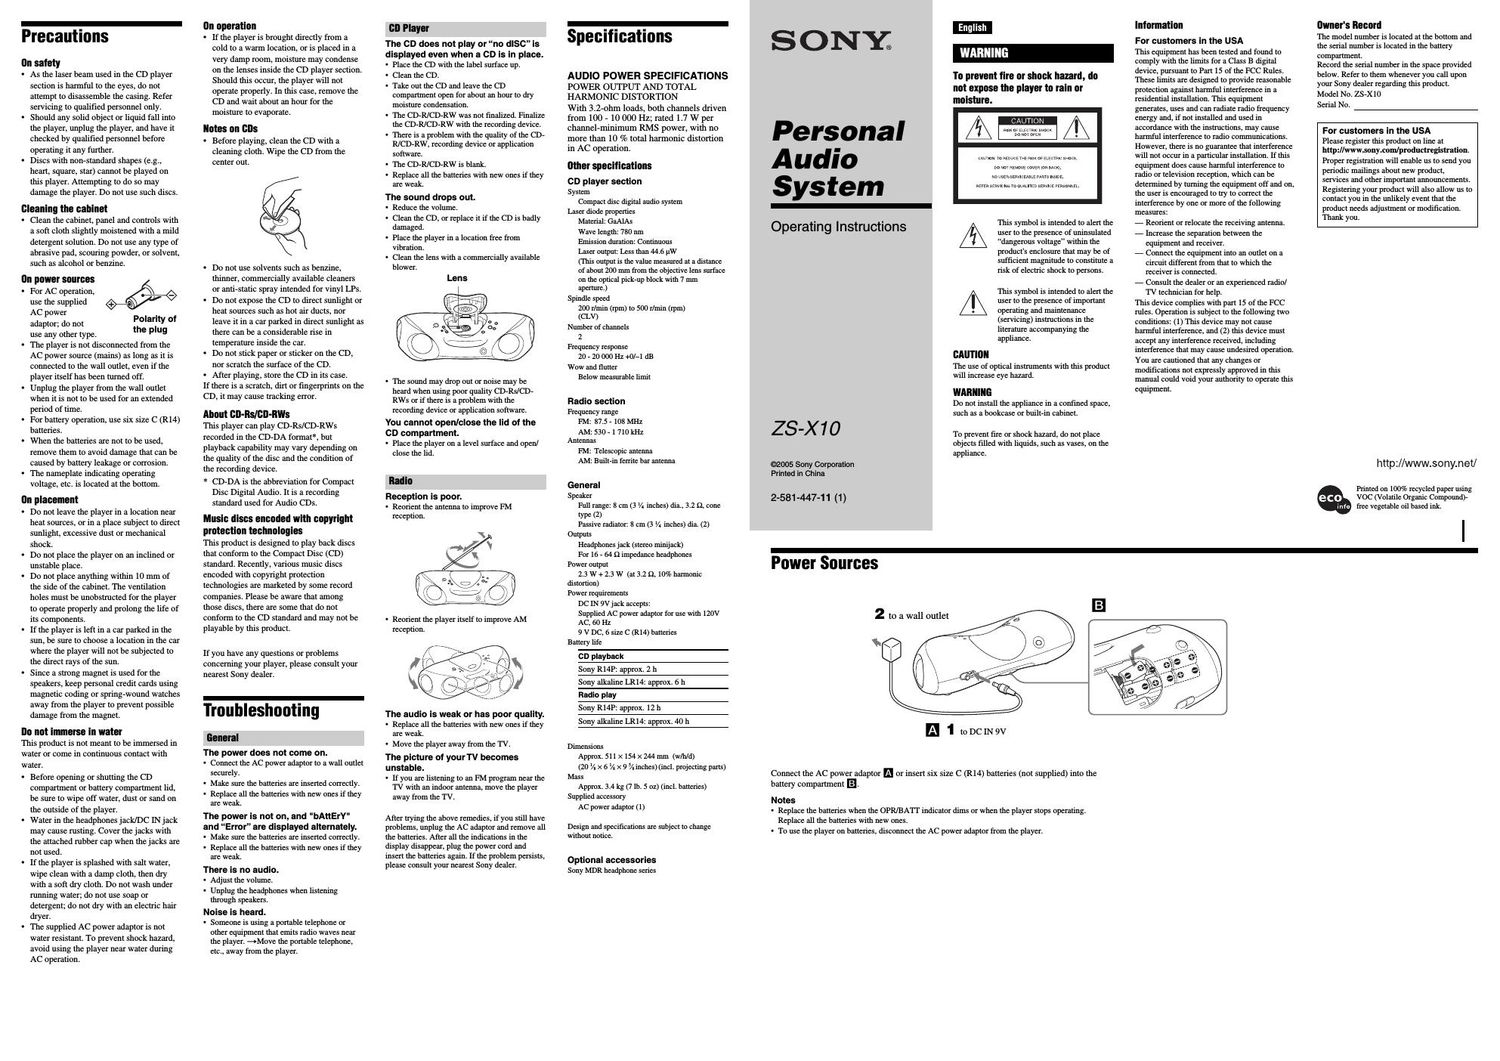 sony zs x 10 owners manual